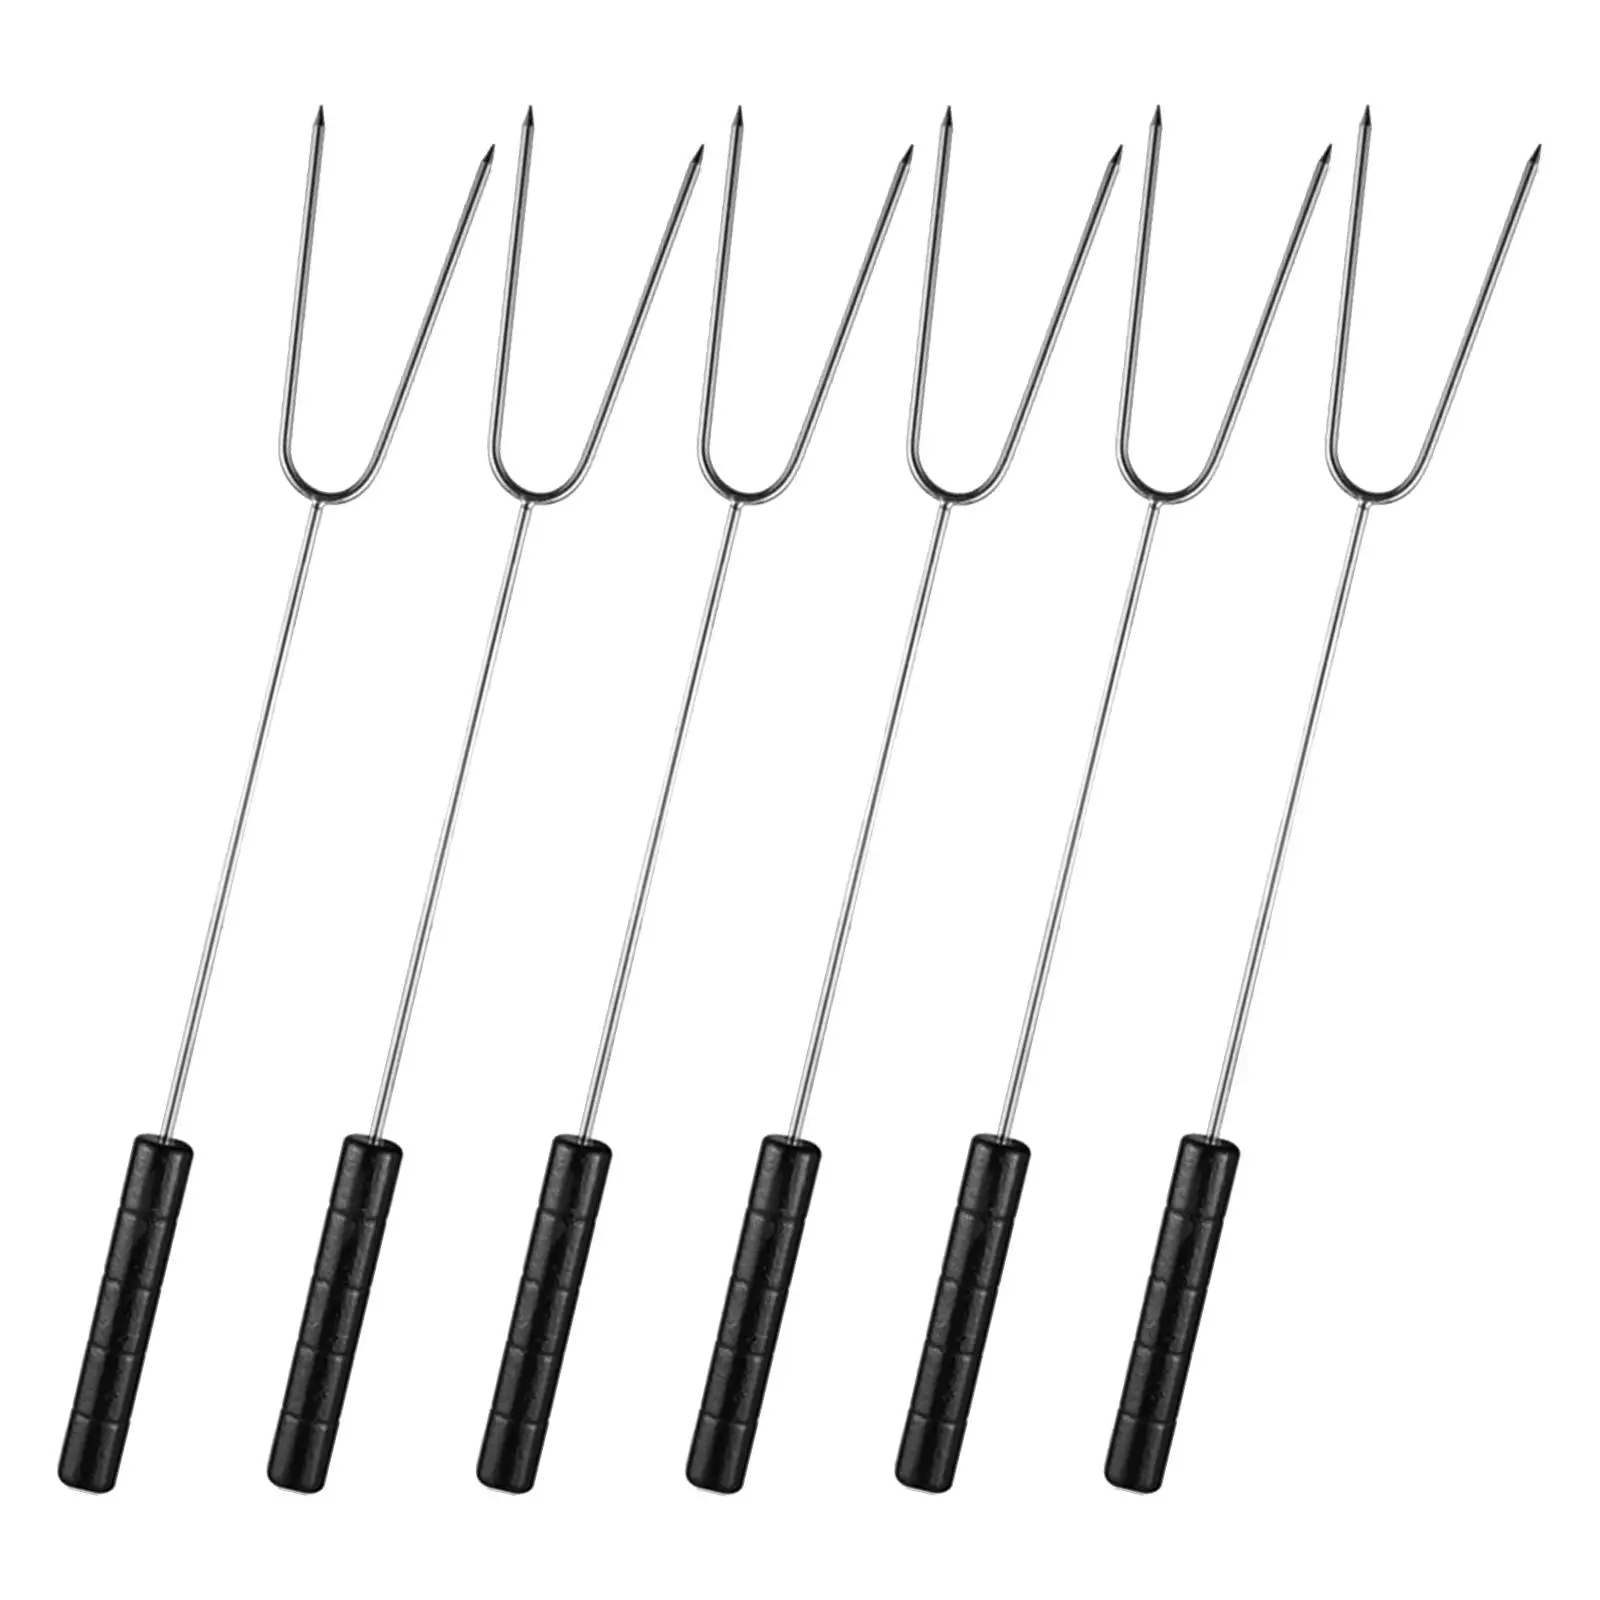 BBQ Fork Barbecue Tools Barbecue Meat Fork for Campfire Party Picnic Kitchen